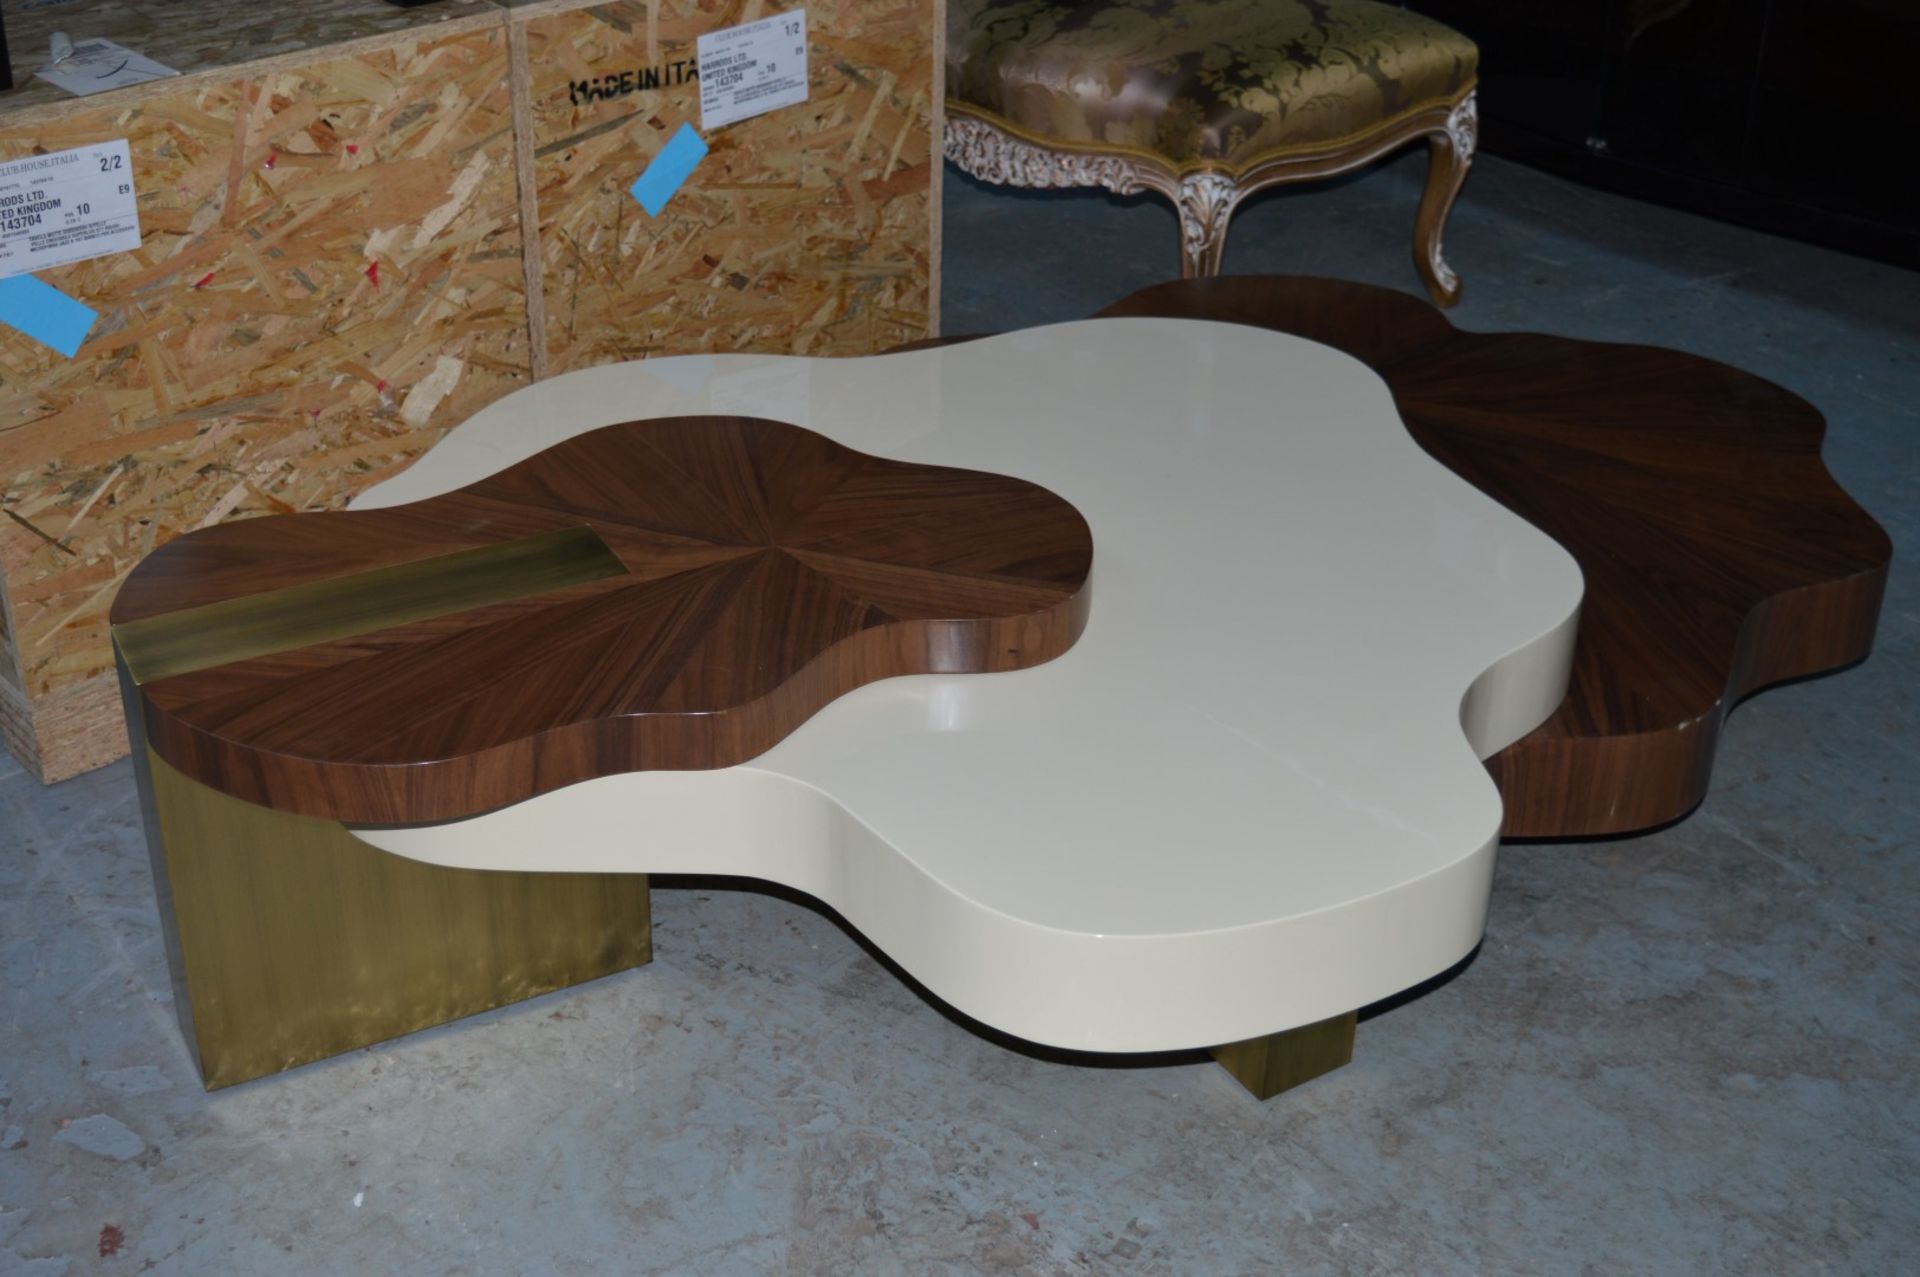 1 x Ginger & Jagger Nenhuphar Coffee Table - Urbanmint Design - Eye Catching Design - Walnut and - Image 7 of 15